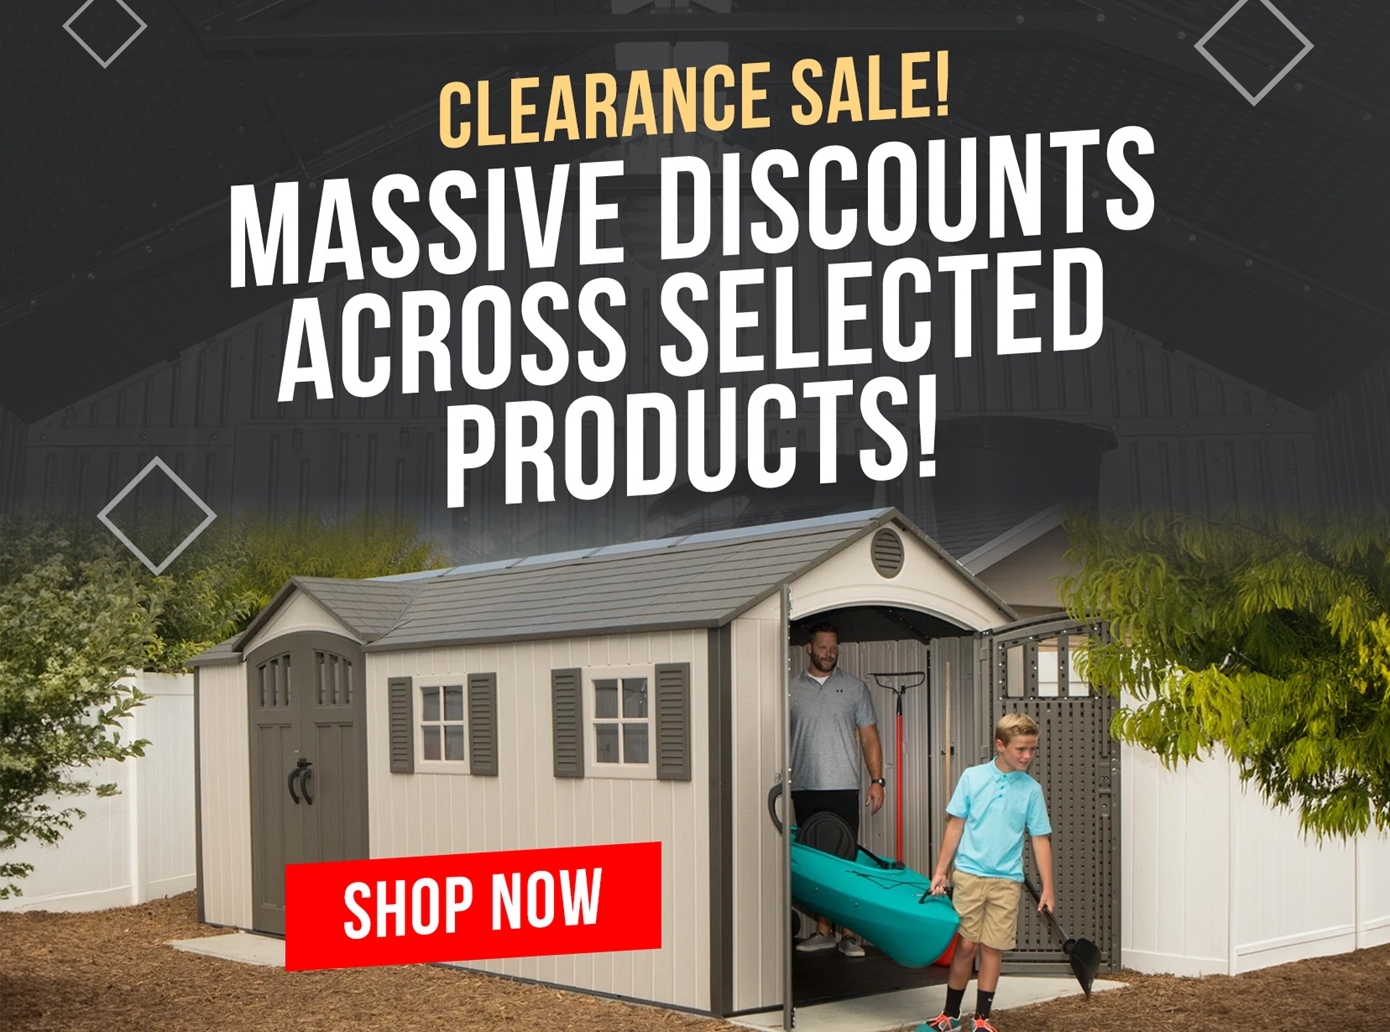 Massive discounts across selected products!